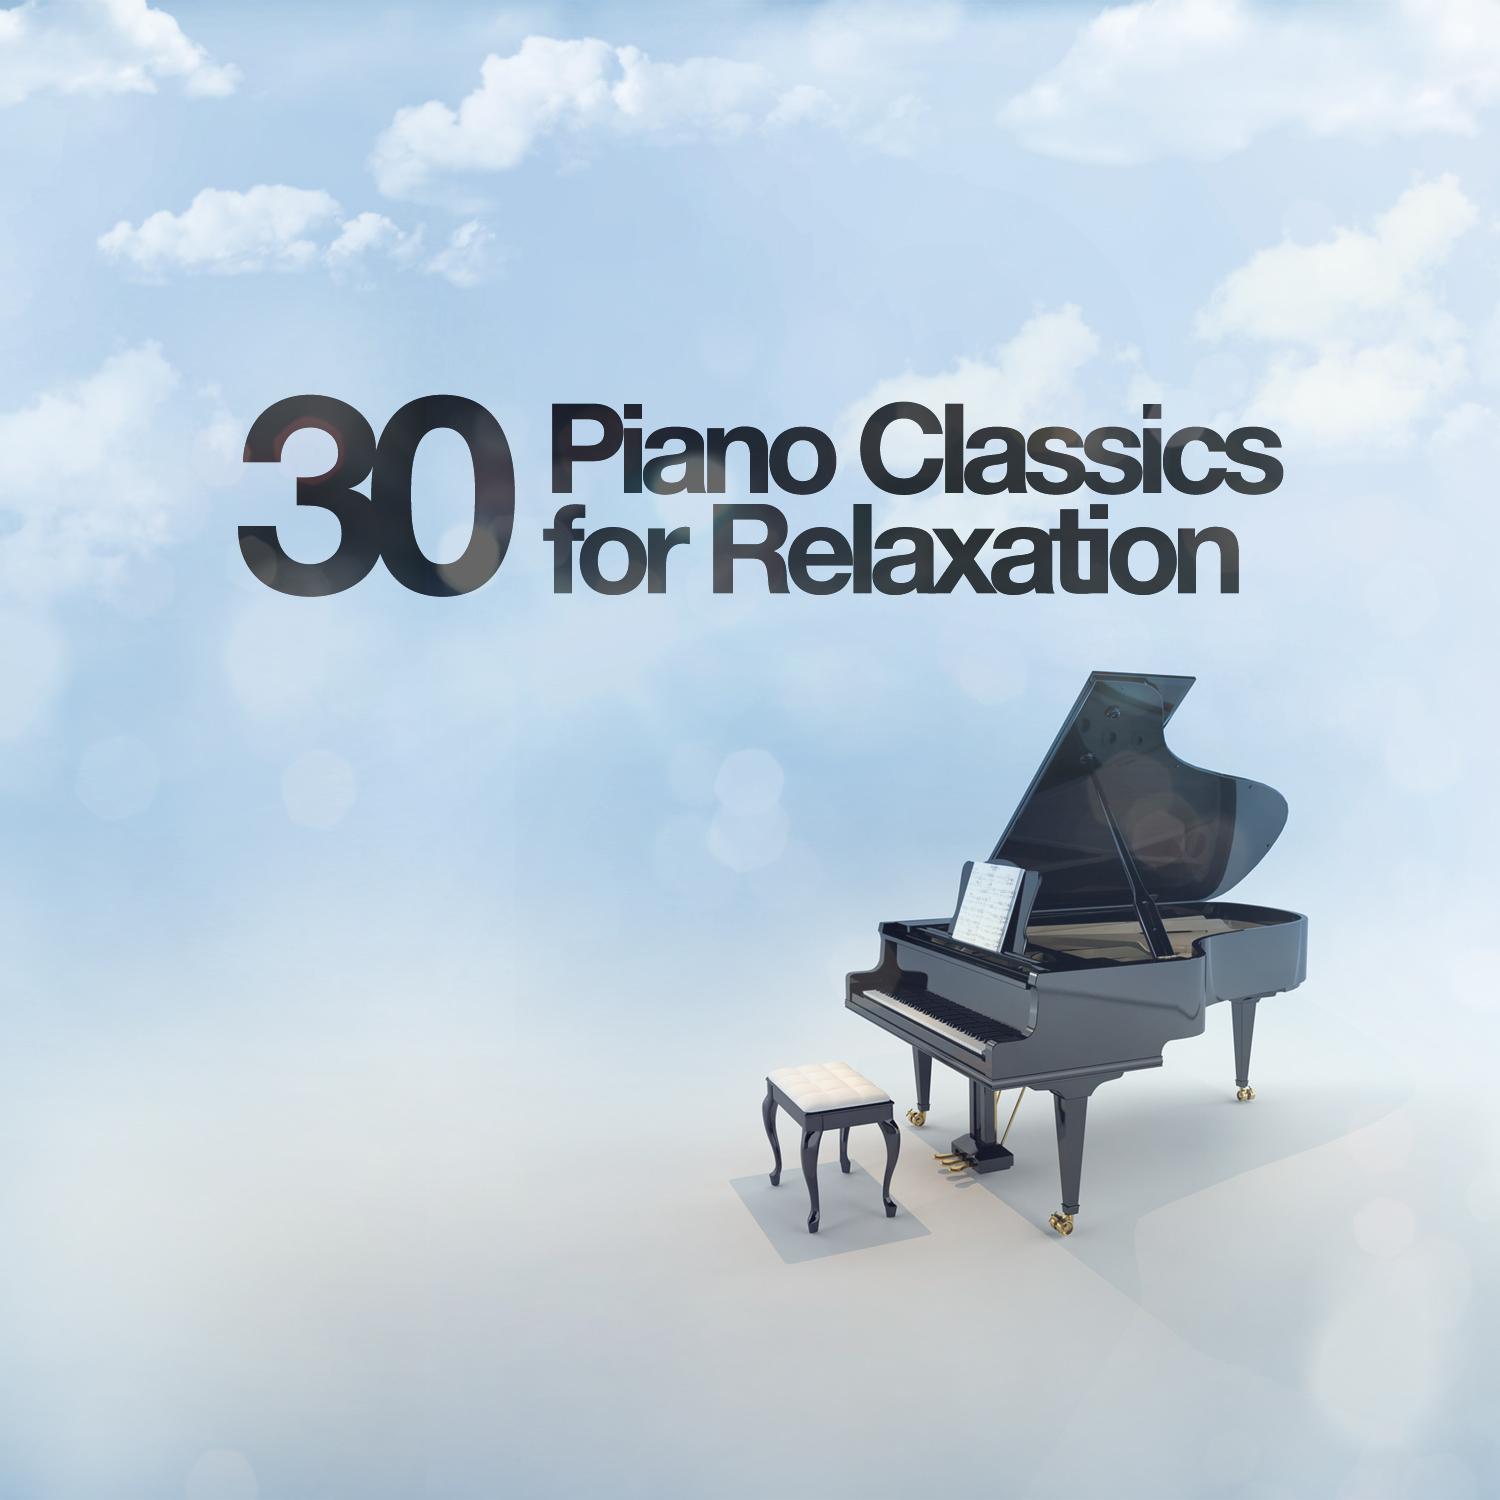 30 Piano Classics for Relaxation